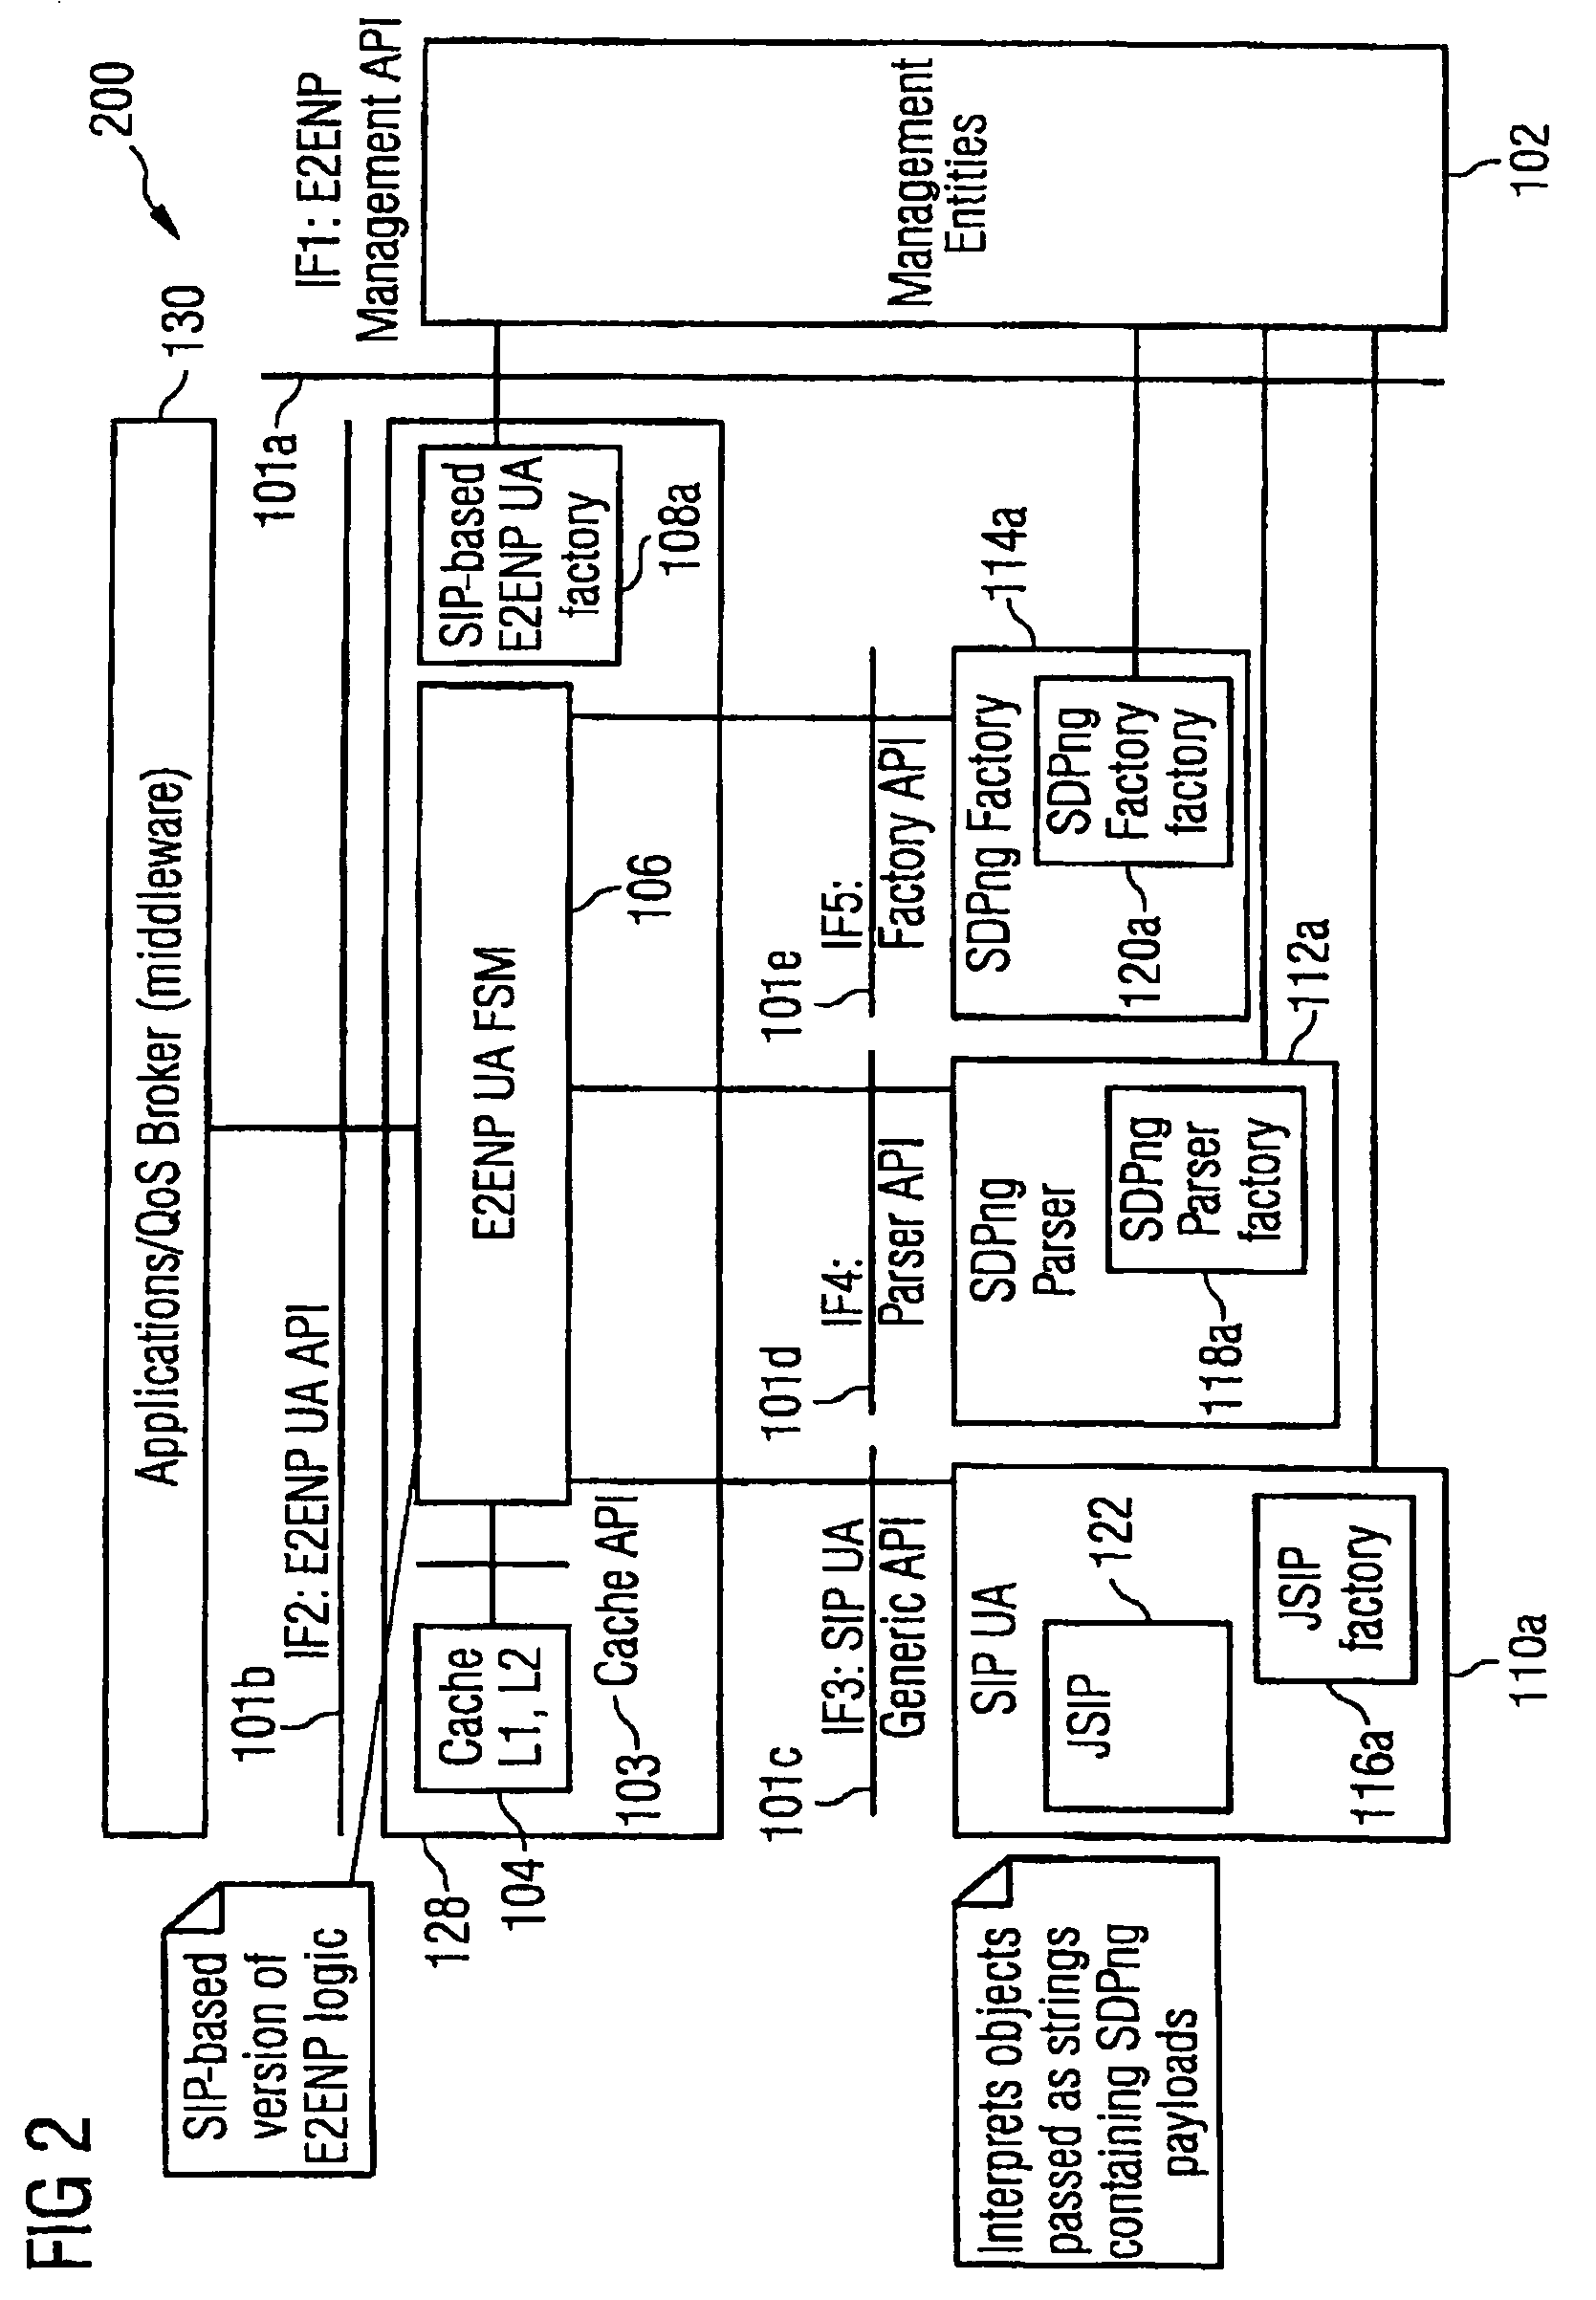 Specification of a software architecture for capability and quality-of-service negotiations and session establishment for distributed multimedia applications